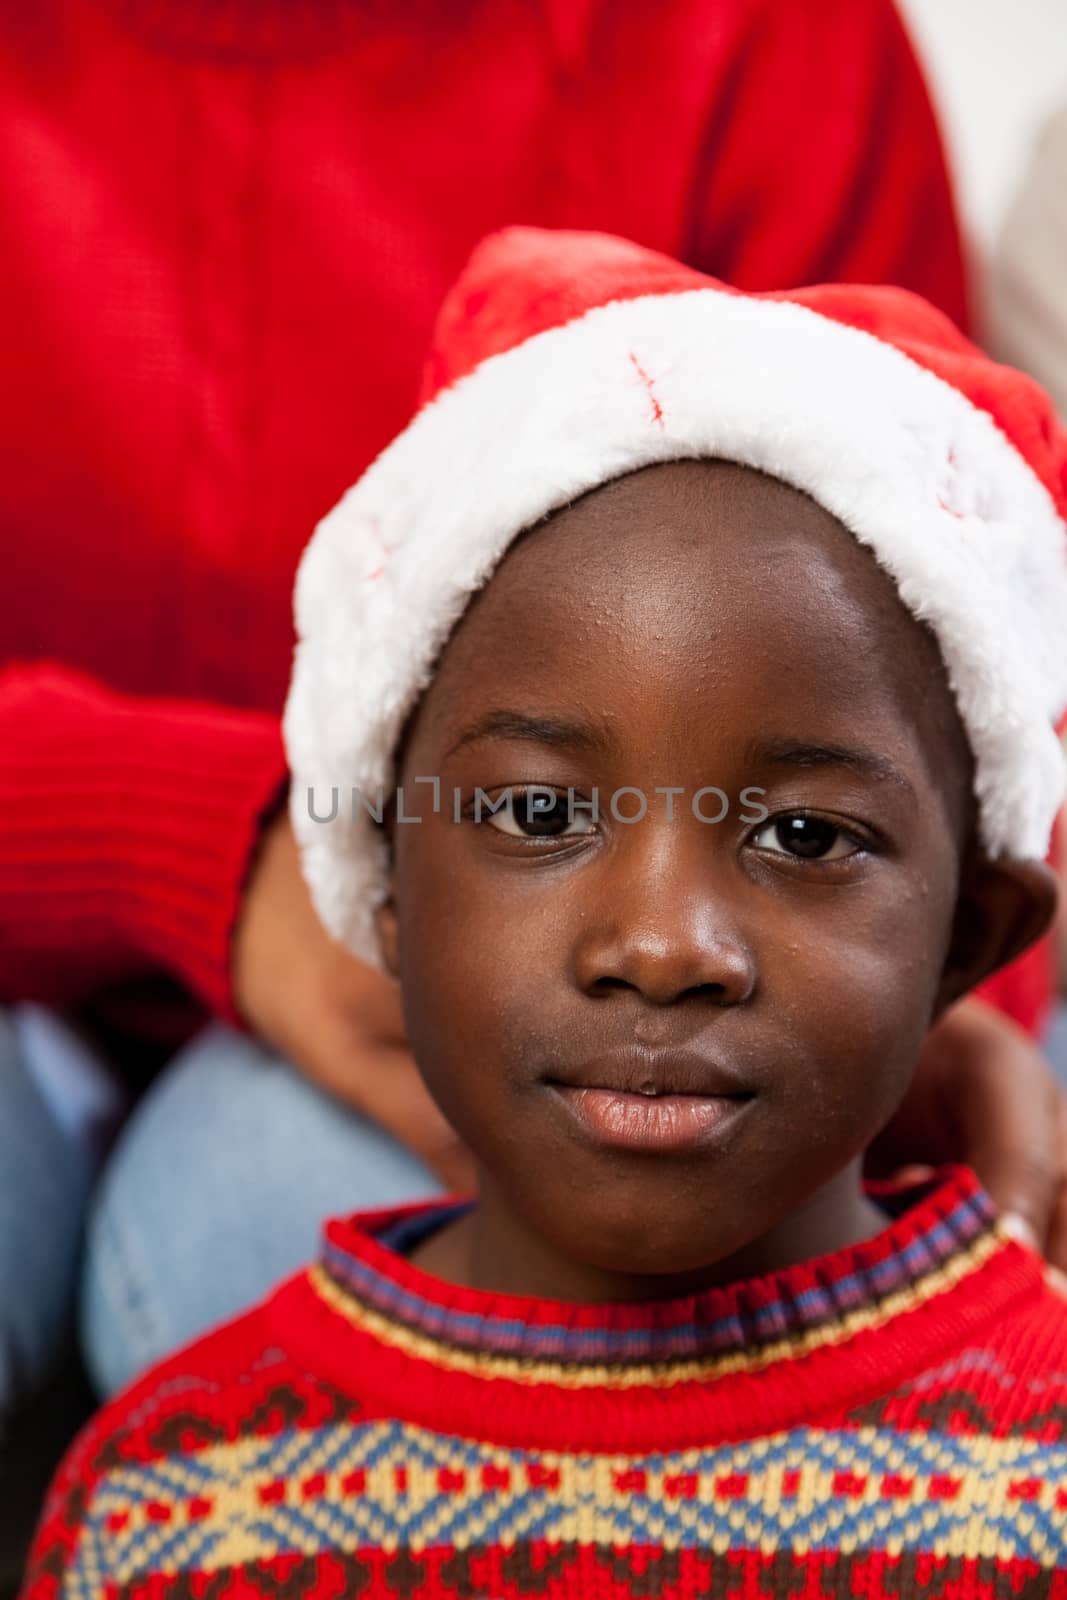 4-6, african, at, black, boy, camera, celebrating, celebration, cheerful, child, children, christmas, color, colour, elementary, gift, happiness, happy, hat, holding, holiday, home, indoors, inside, laughing, living, looking, model, old, portrait, property, red, releases, room, sitting, smiling, special, sweater, vertical, white, years